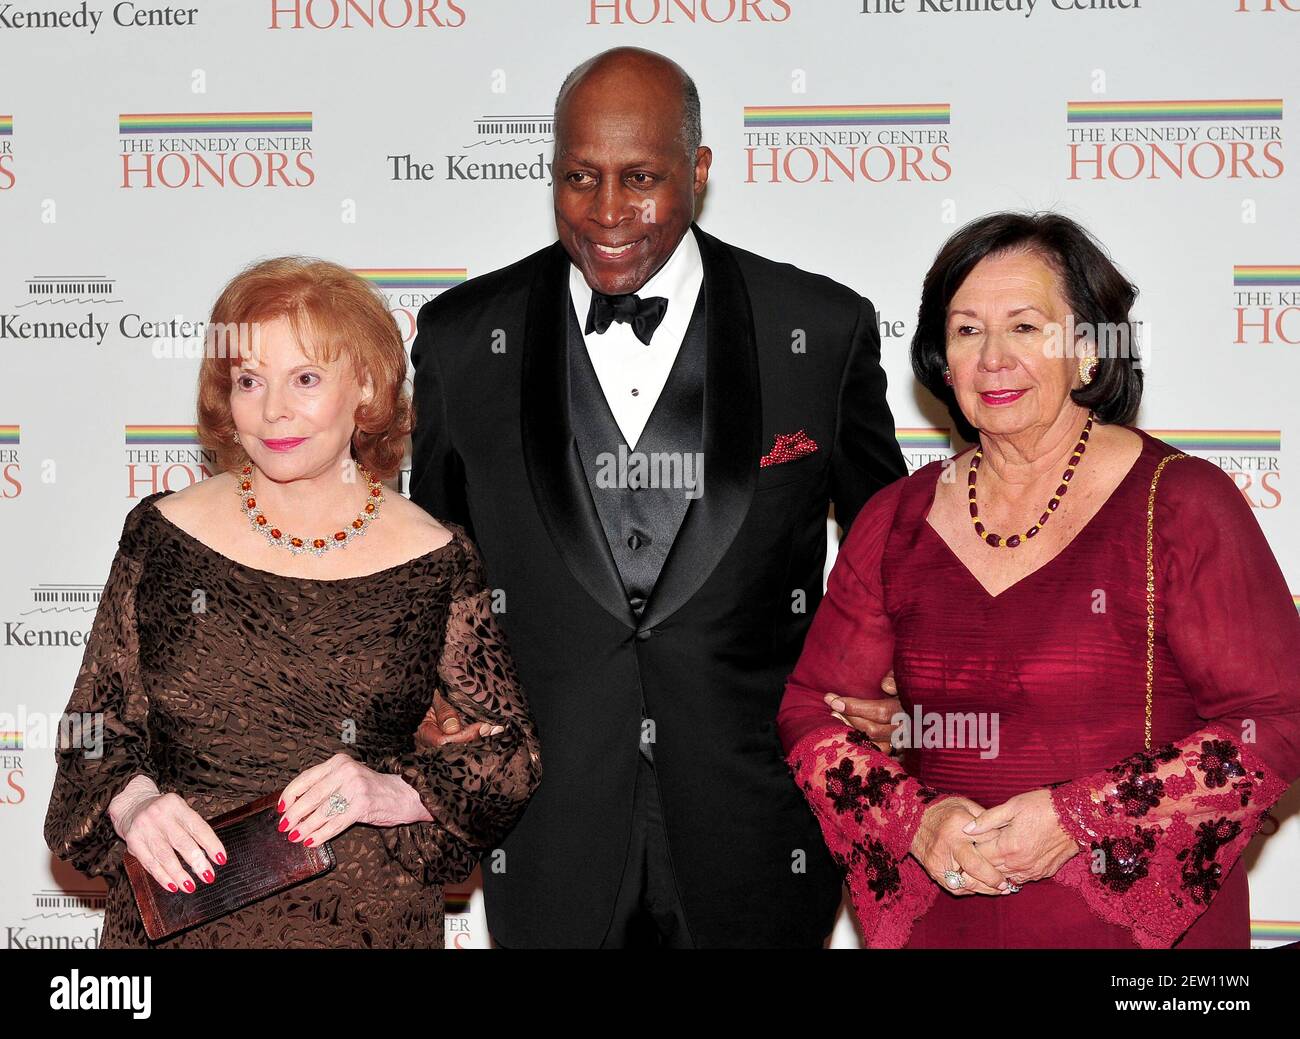 File photo dated December 4, 2010 - Buffy Cafritz, Vernon Jordan and Anne Jordan arrive for the formal Artist's Dinner at the United States Department of State in Washington, D.C. on Saturday, December 4, 2010.. - Vernon Jordan, a civil rights icon and adviser to former President Bill Clinton, died on Monday March 1, 2021 at the age of 85. Photo by Ron Sachs/CNP/ABACAPRESS.COM. Stock Photo